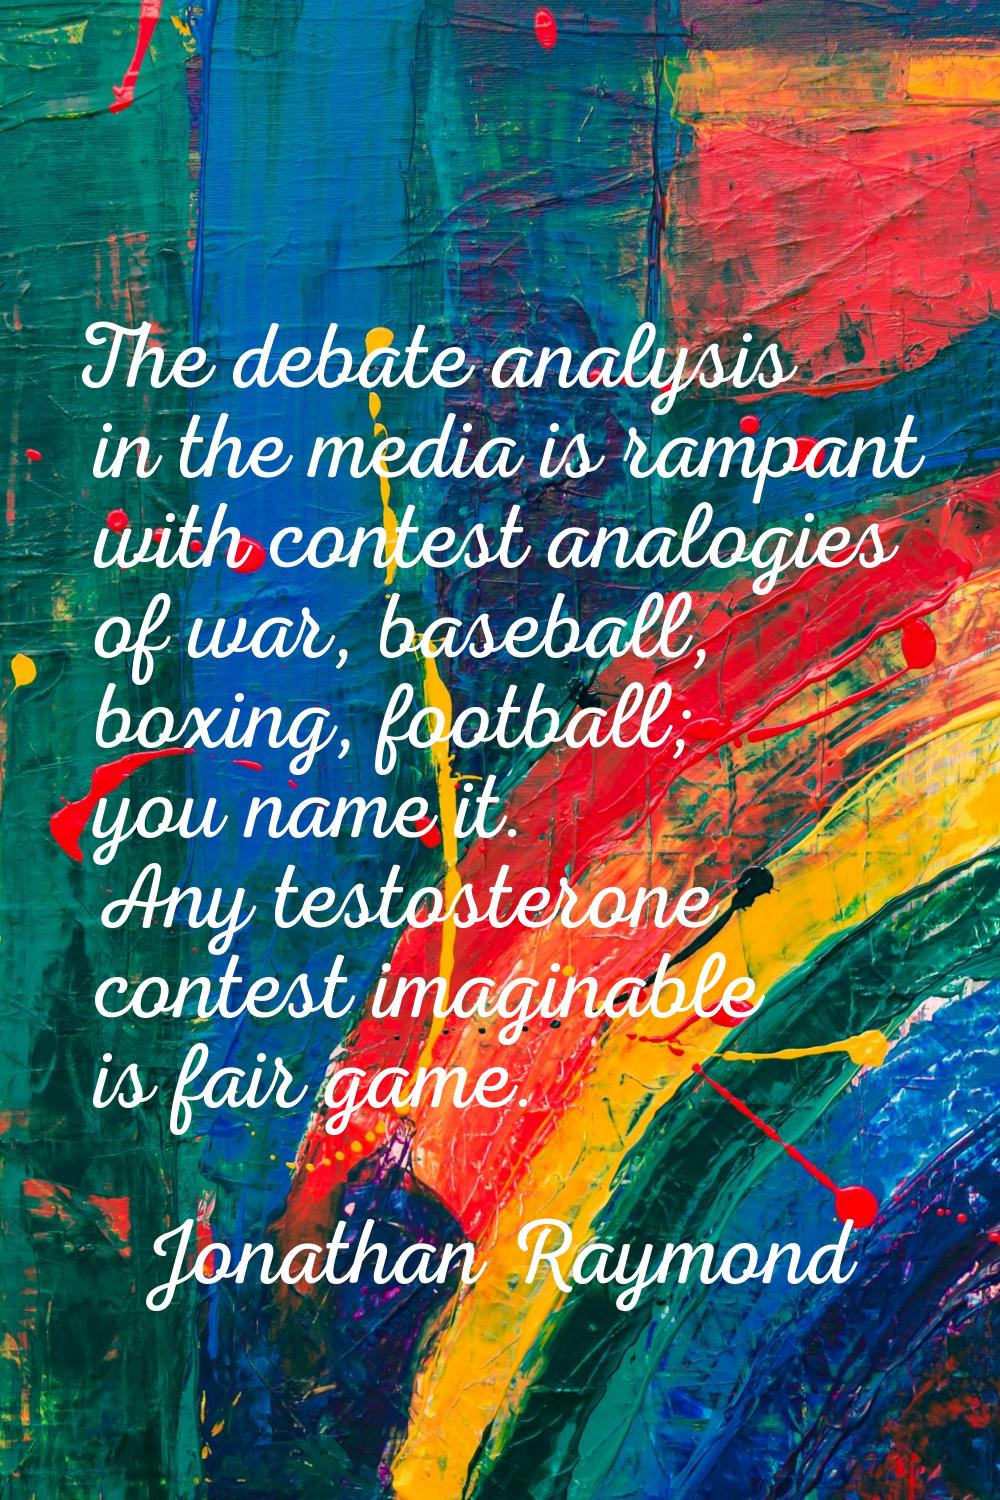 The debate analysis in the media is rampant with contest analogies of war, baseball, boxing, footba